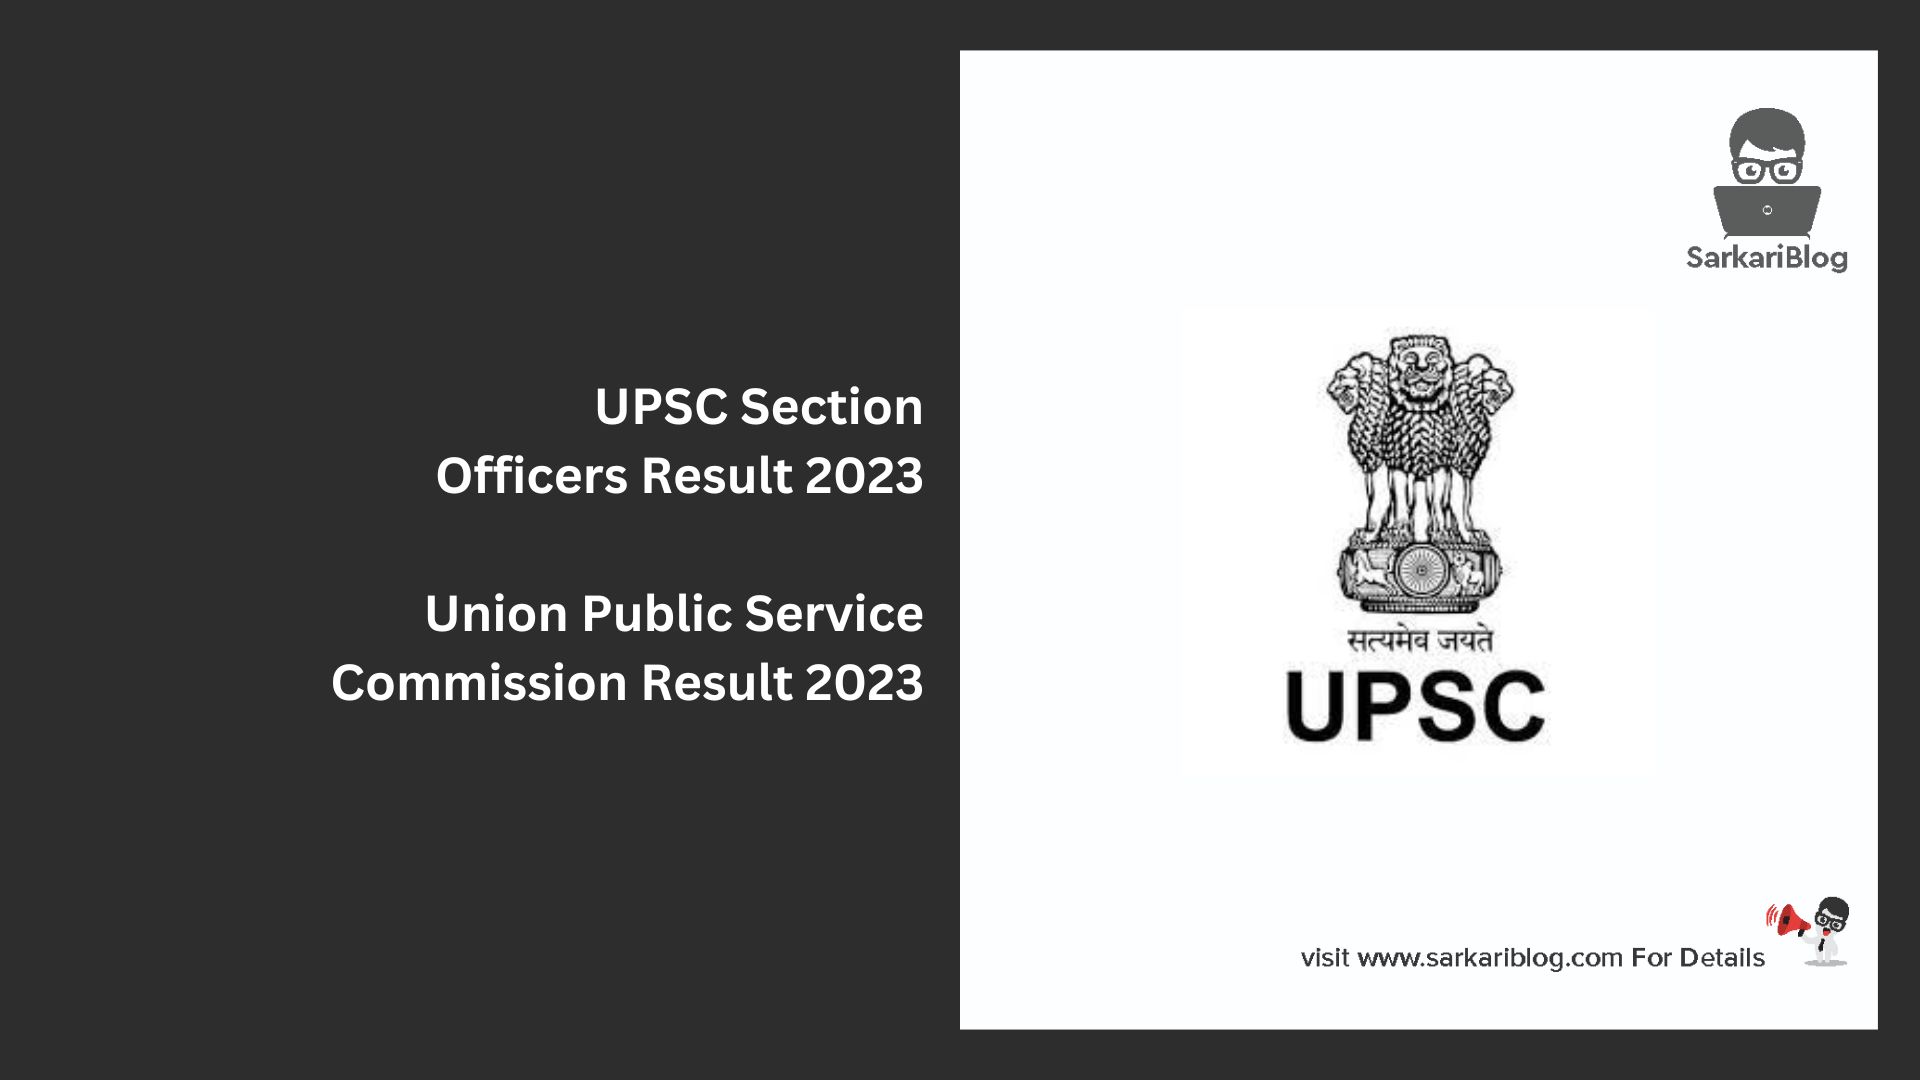 UPSC Section Officers Result 2023